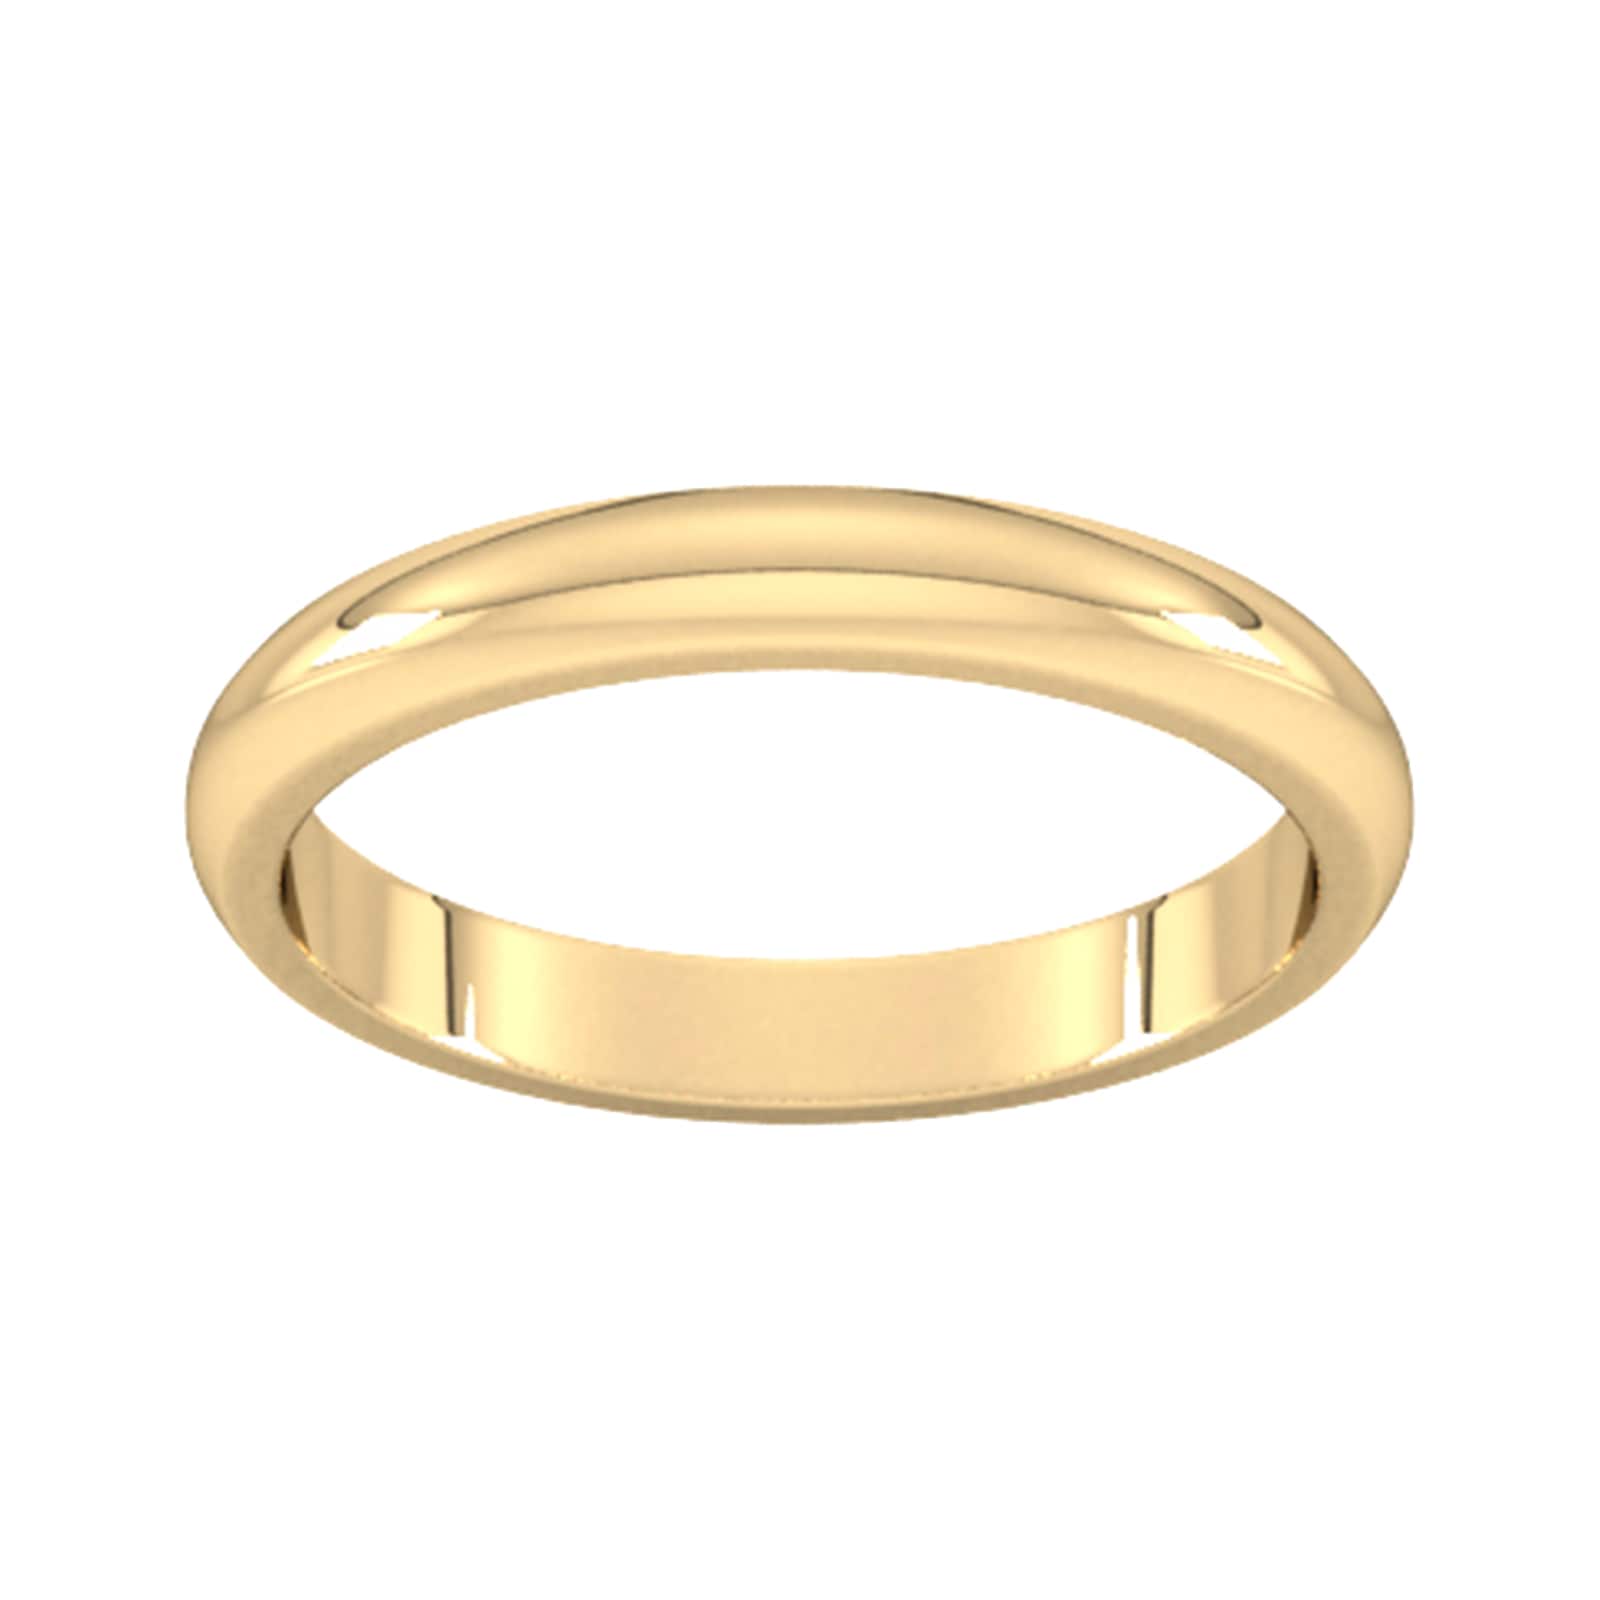 3mm D Shape Heavy Wedding Ring In 18 Carat Yellow Gold - Ring Size U